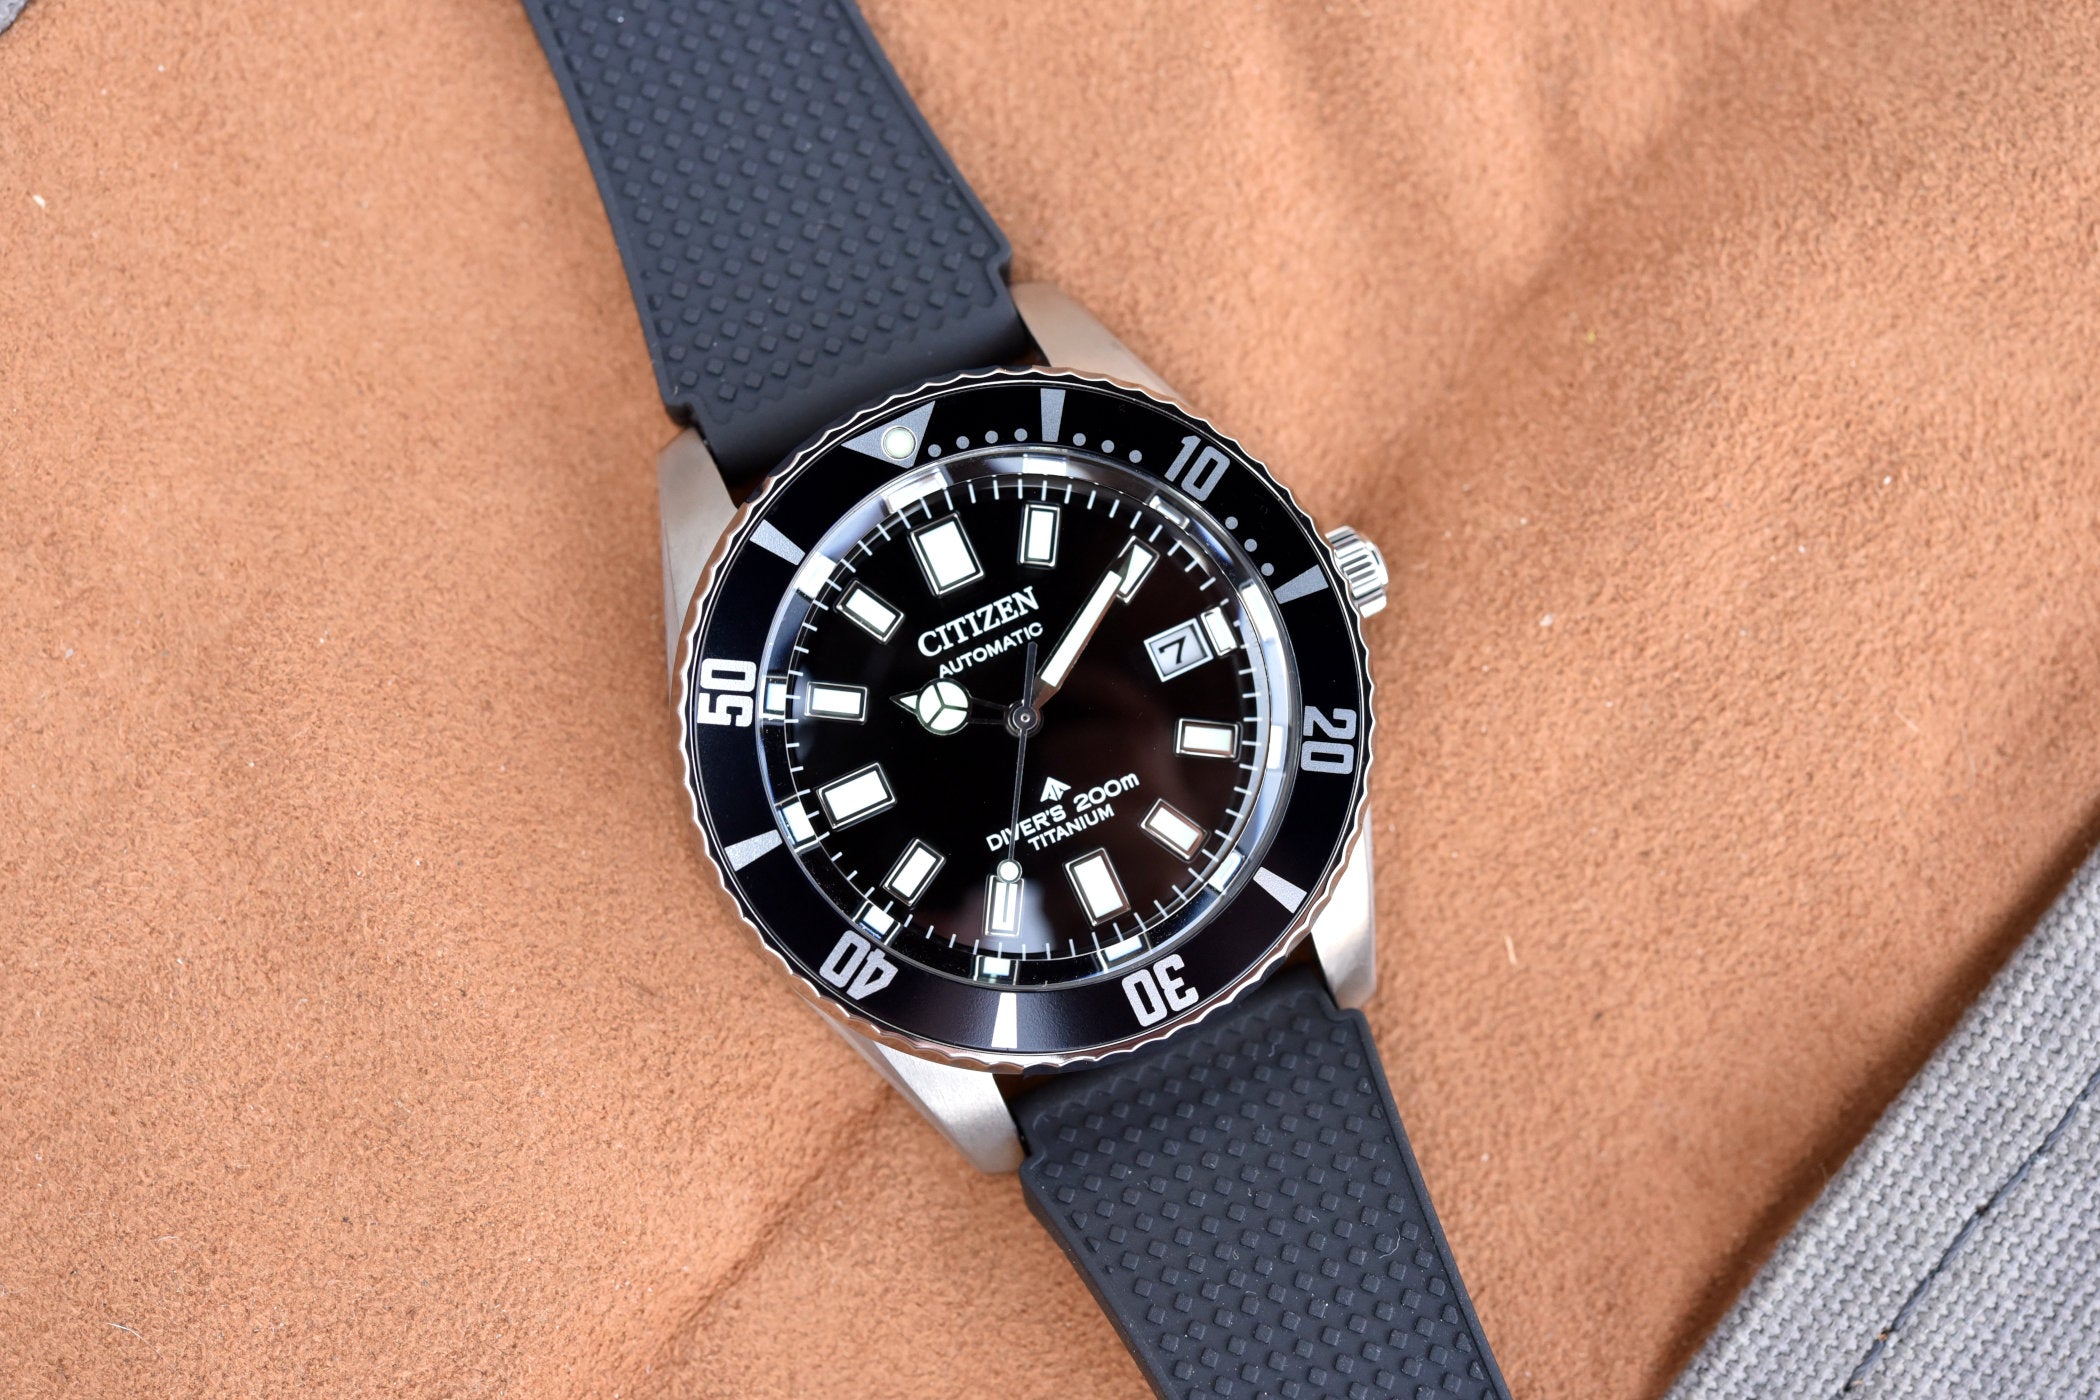 Introducing The Citizen Promaster Mechanical Diver 200M NB6021